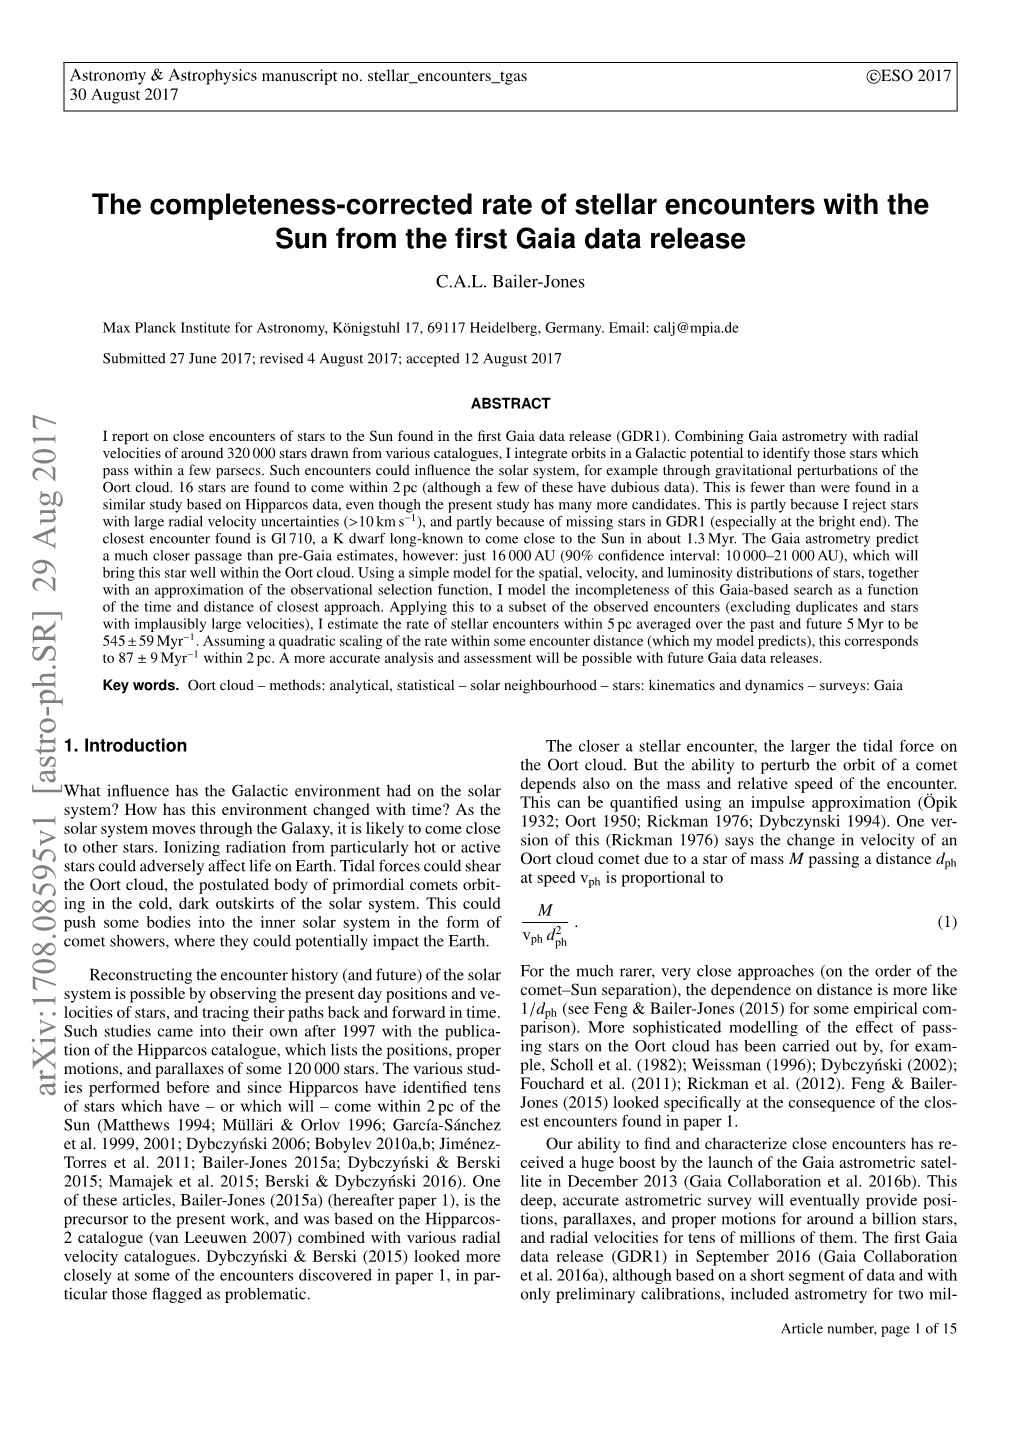 The Completeness-Corrected Rate of Stellar Encounters with the Sun from the ﬁrst Gaia Data Release C.A.L